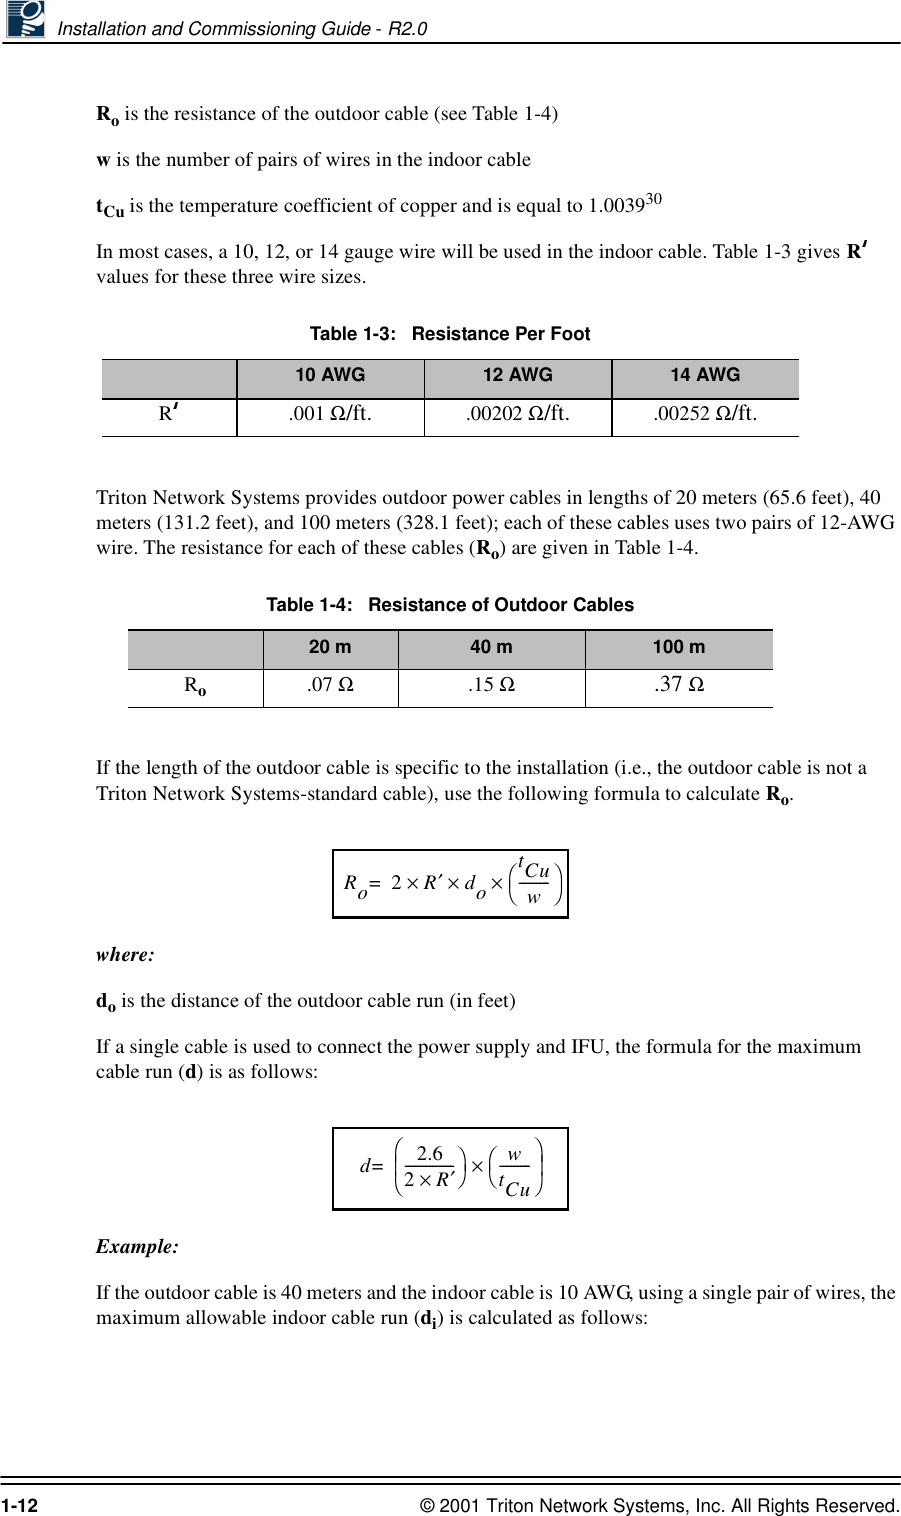  Installation and Commissioning Guide - R2.01-12 © 2001 Triton Network Systems, Inc. All Rights Reserved.Ro is the resistance of the outdoor cable (see Table 1-4)w is the number of pairs of wires in the indoor cabletCu is the temperature coefficient of copper and is equal to 1.003930In most cases, a 10, 12, or 14 gauge wire will be used in the indoor cable. Table 1-3 gives R values for these three wire sizes.Triton Network Systems provides outdoor power cables in lengths of 20 meters (65.6 feet), 40 meters (131.2 feet), and 100 meters (328.1 feet); each of these cables uses two pairs of 12-AWG wire. The resistance for each of these cables (Ro) are given in Table 1-4.If the length of the outdoor cable is specific to the installation (i.e., the outdoor cable is not a Triton Network Systems-standard cable), use the following formula to calculate Ro.where:do is the distance of the outdoor cable run (in feet)If a single cable is used to connect the power supply and IFU, the formula for the maximum cable run (d) is as follows:Example:If the outdoor cable is 40 meters and the indoor cable is 10 AWG, using a single pair of wires, the maximum allowable indoor cable run (di) is calculated as follows:Table 1-3:   Resistance Per Foot10 AWG 12 AWG 14 AWGR .001 Ω/ft. .00202 Ω/ft. .00252 Ω/ft.Table 1-4:   Resistance of Outdoor Cables20 m 40 m 100 mRo.07 Ω.15 Ω.37 Ω Ro2R′dotCuw---------××× =d2.62R′×-------------- wtCu---------×=